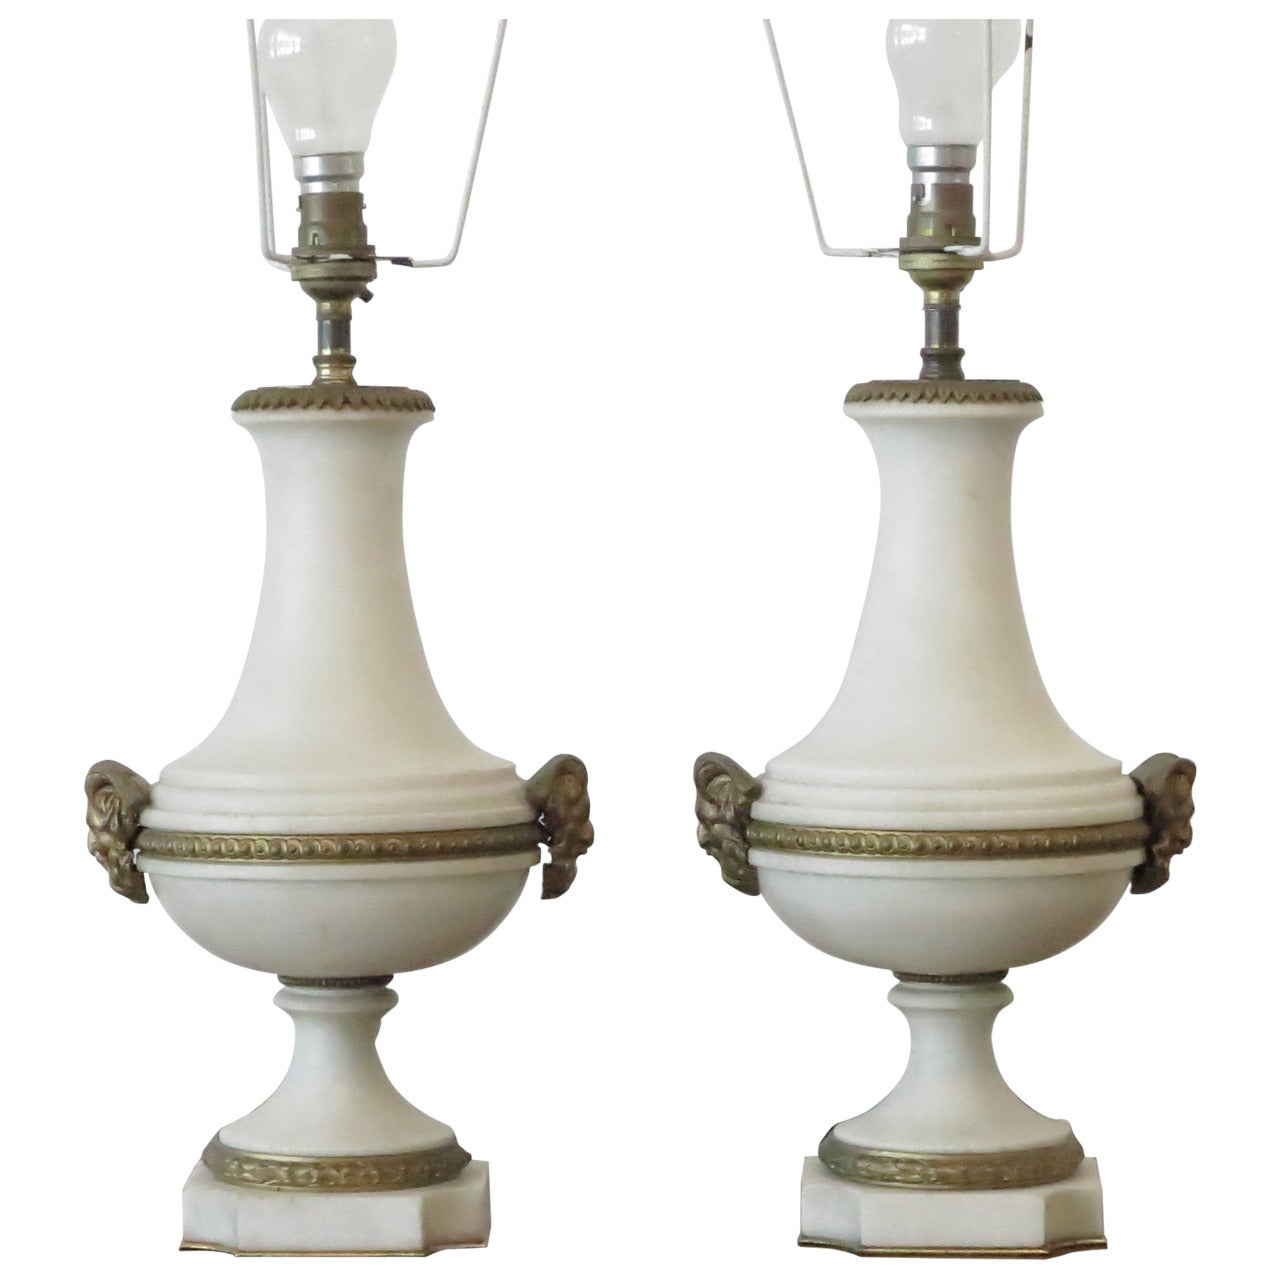 Pair of Neoclassical Alabaster Table Lamps